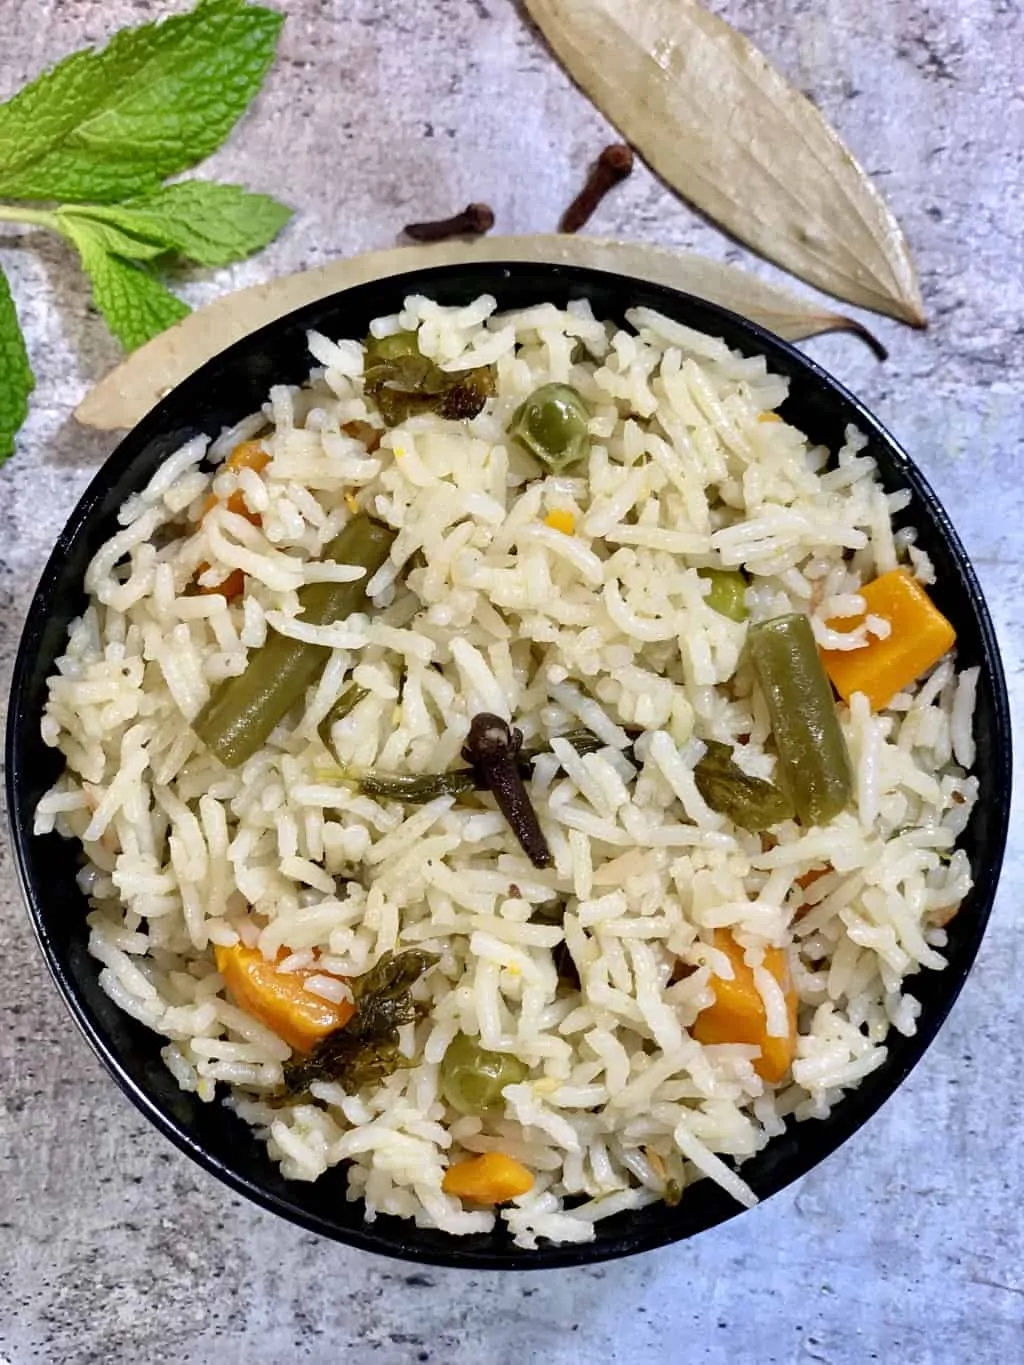 vegetable pulao served in a bowl with whole spices on the side